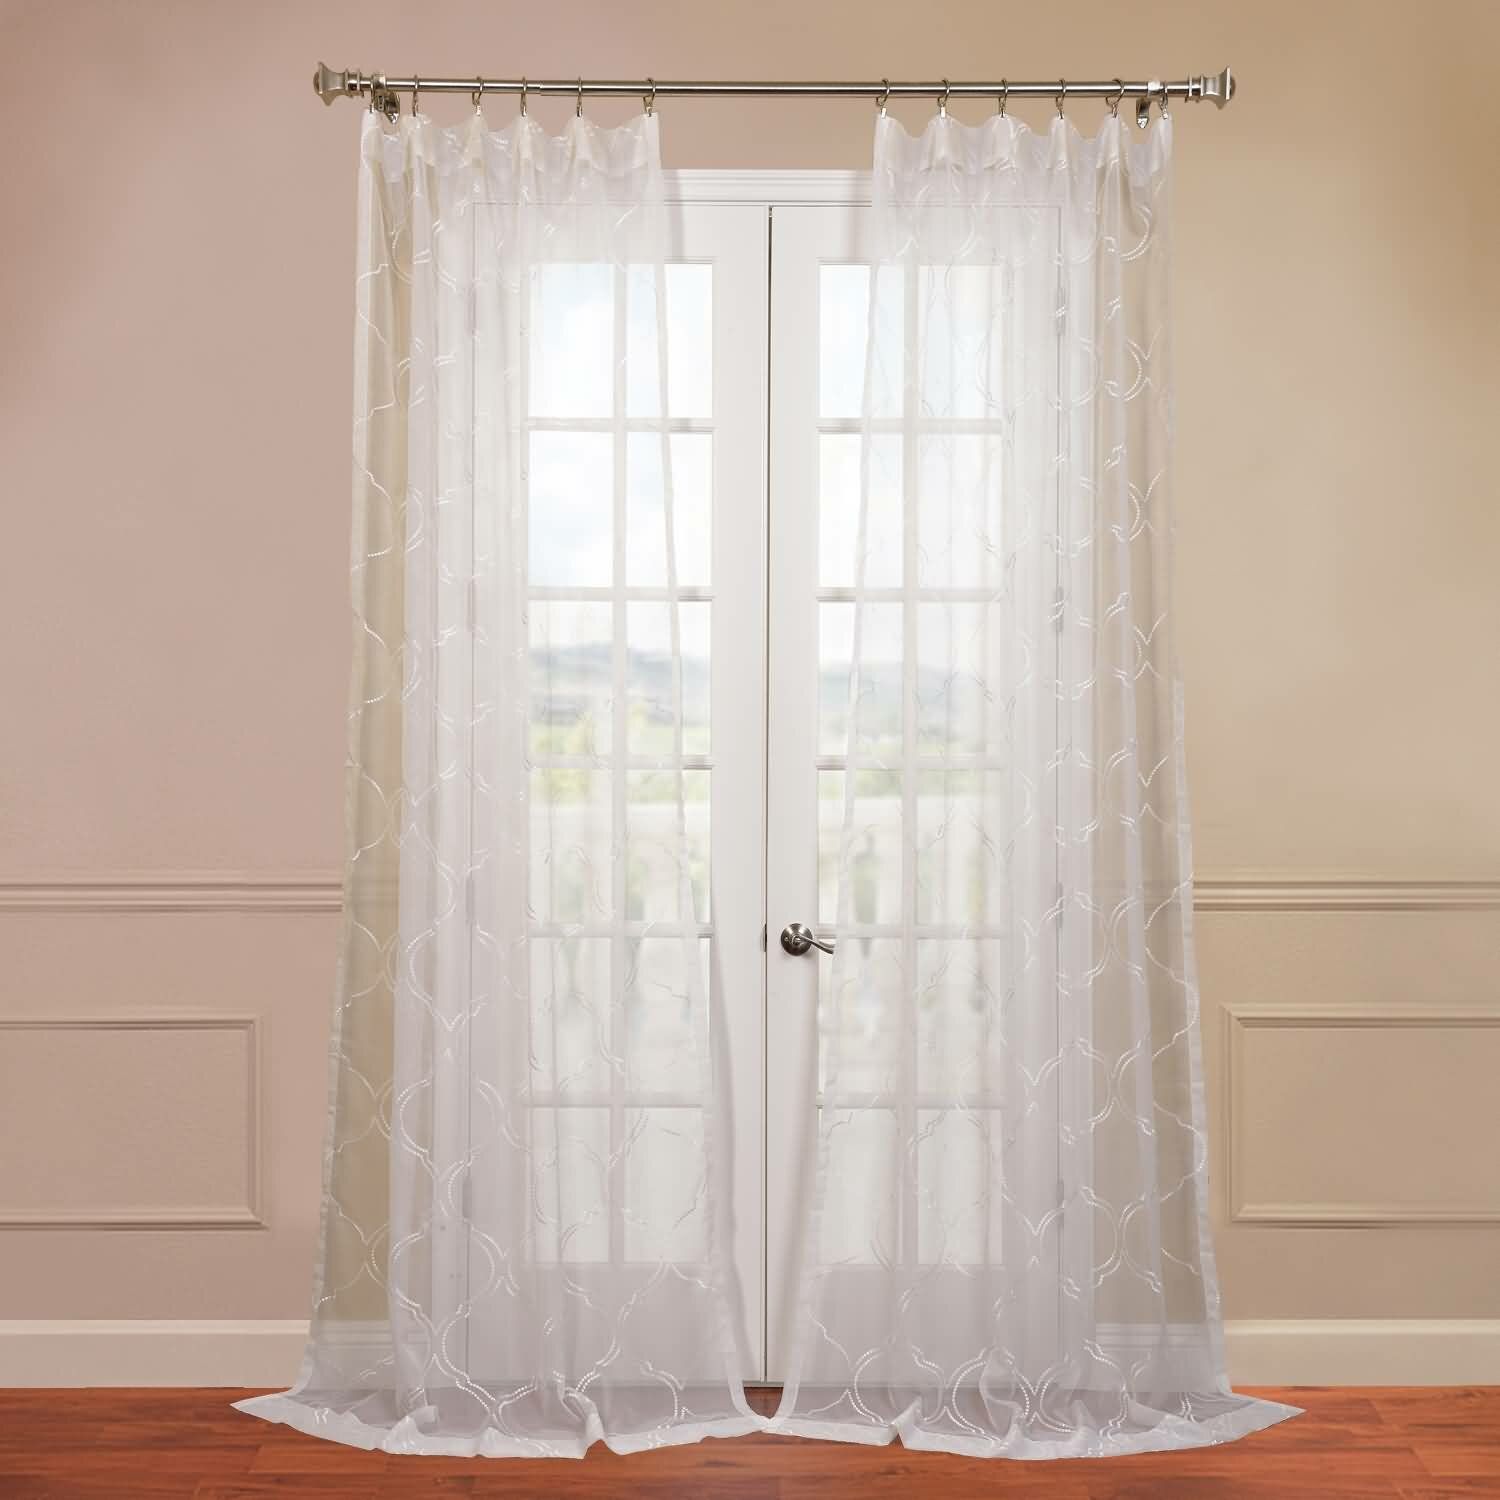 Kelling Geometric Sheer Rod Pocket Single Curtain Panel With Tassels Applique Sheer Rod Pocket Top Curtain Panel Pairs (Photo 23 of 30)